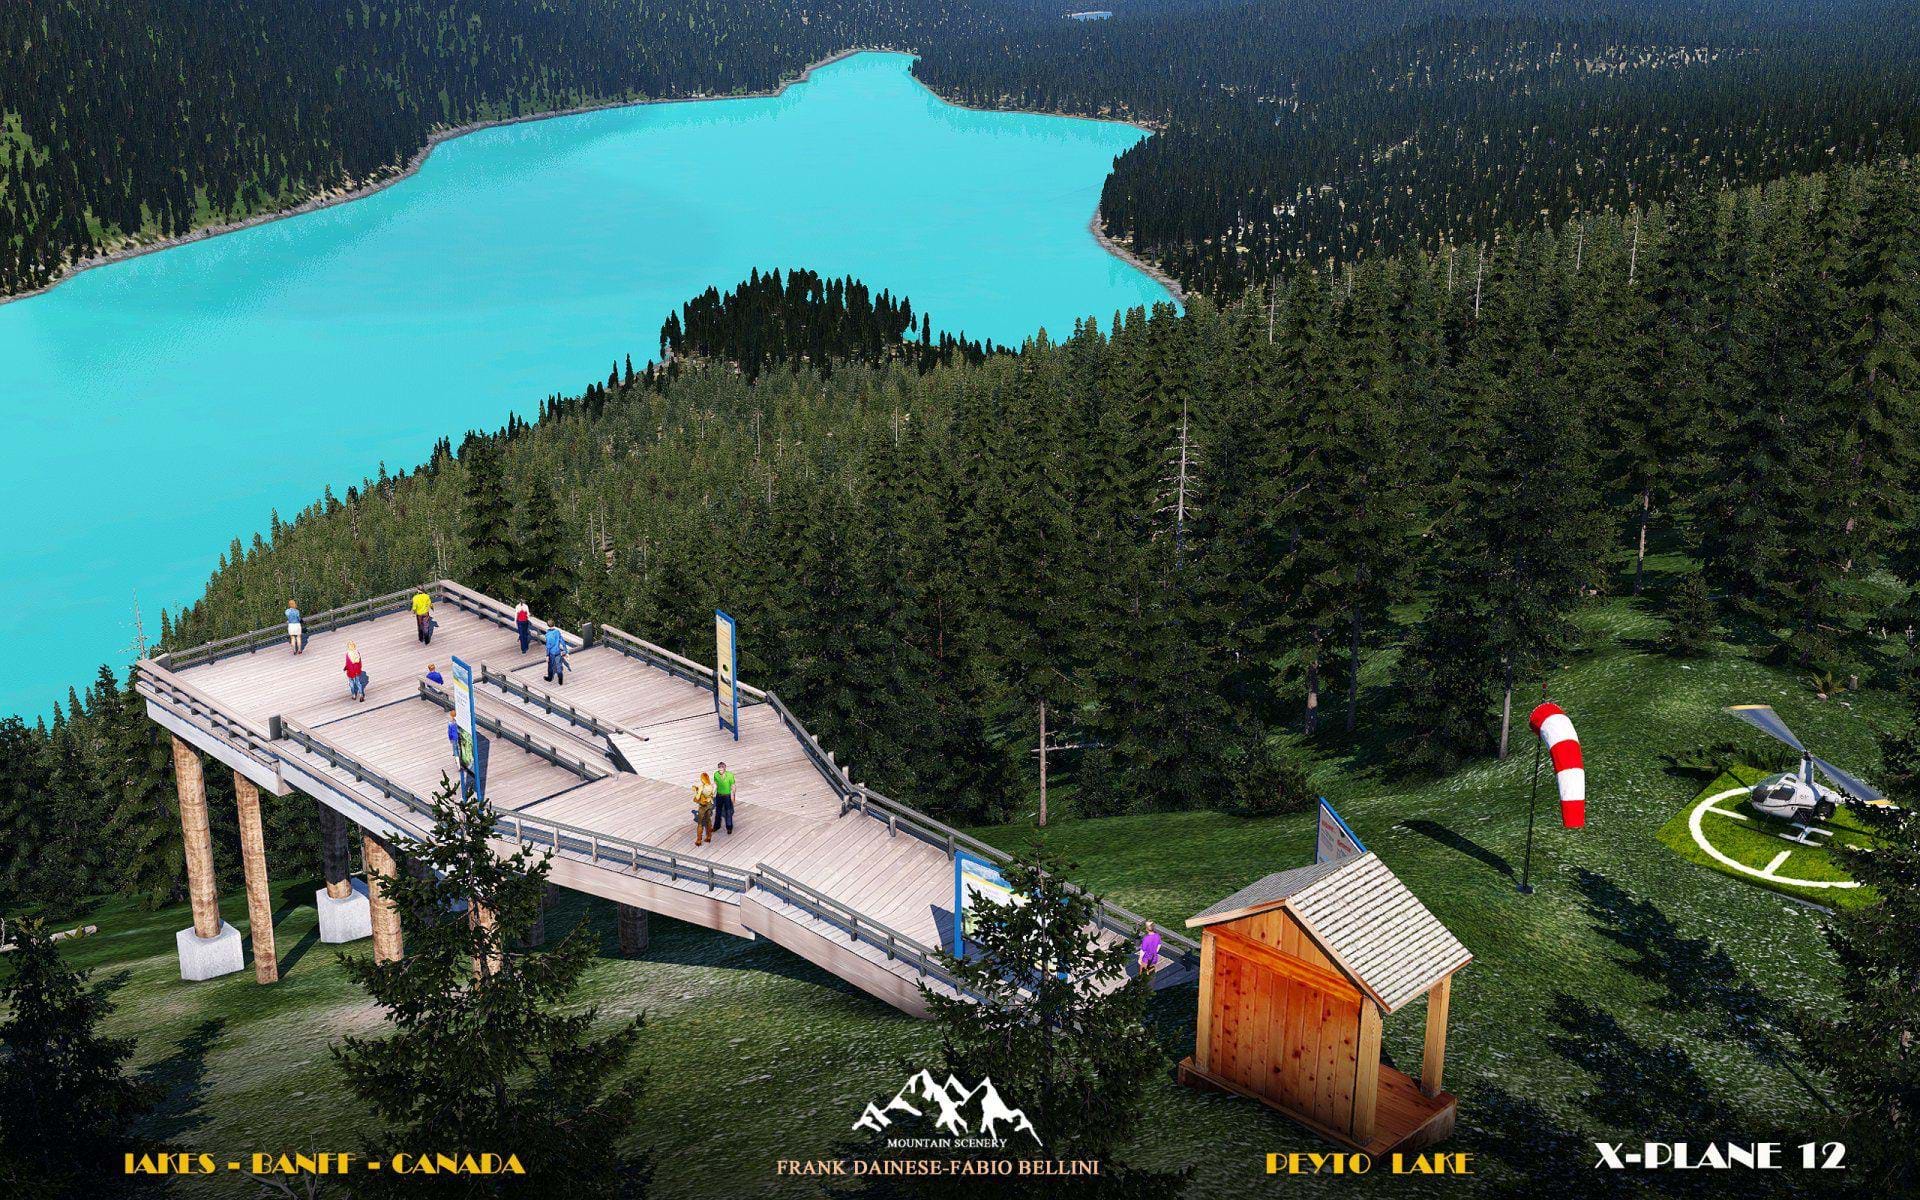 Frank Dainese and Fabio Bellini Banff National Park for X-Plane 12